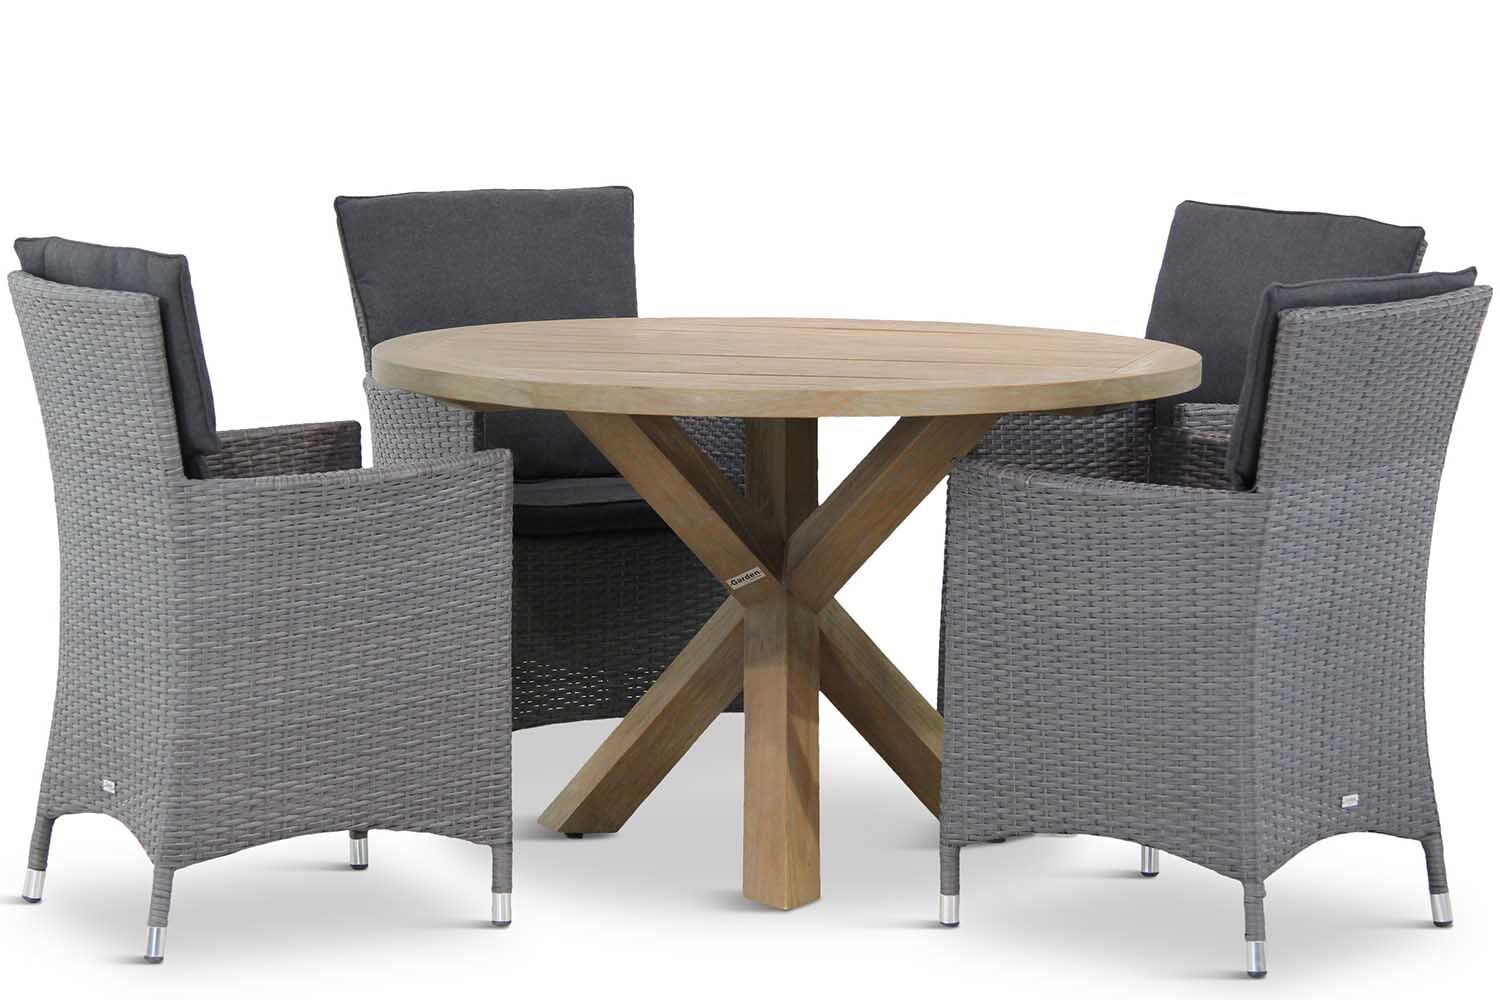 Garden Collections Orlando/Sand City rond 120 cm dining tuinset 5-delig - Grijs-antraciet